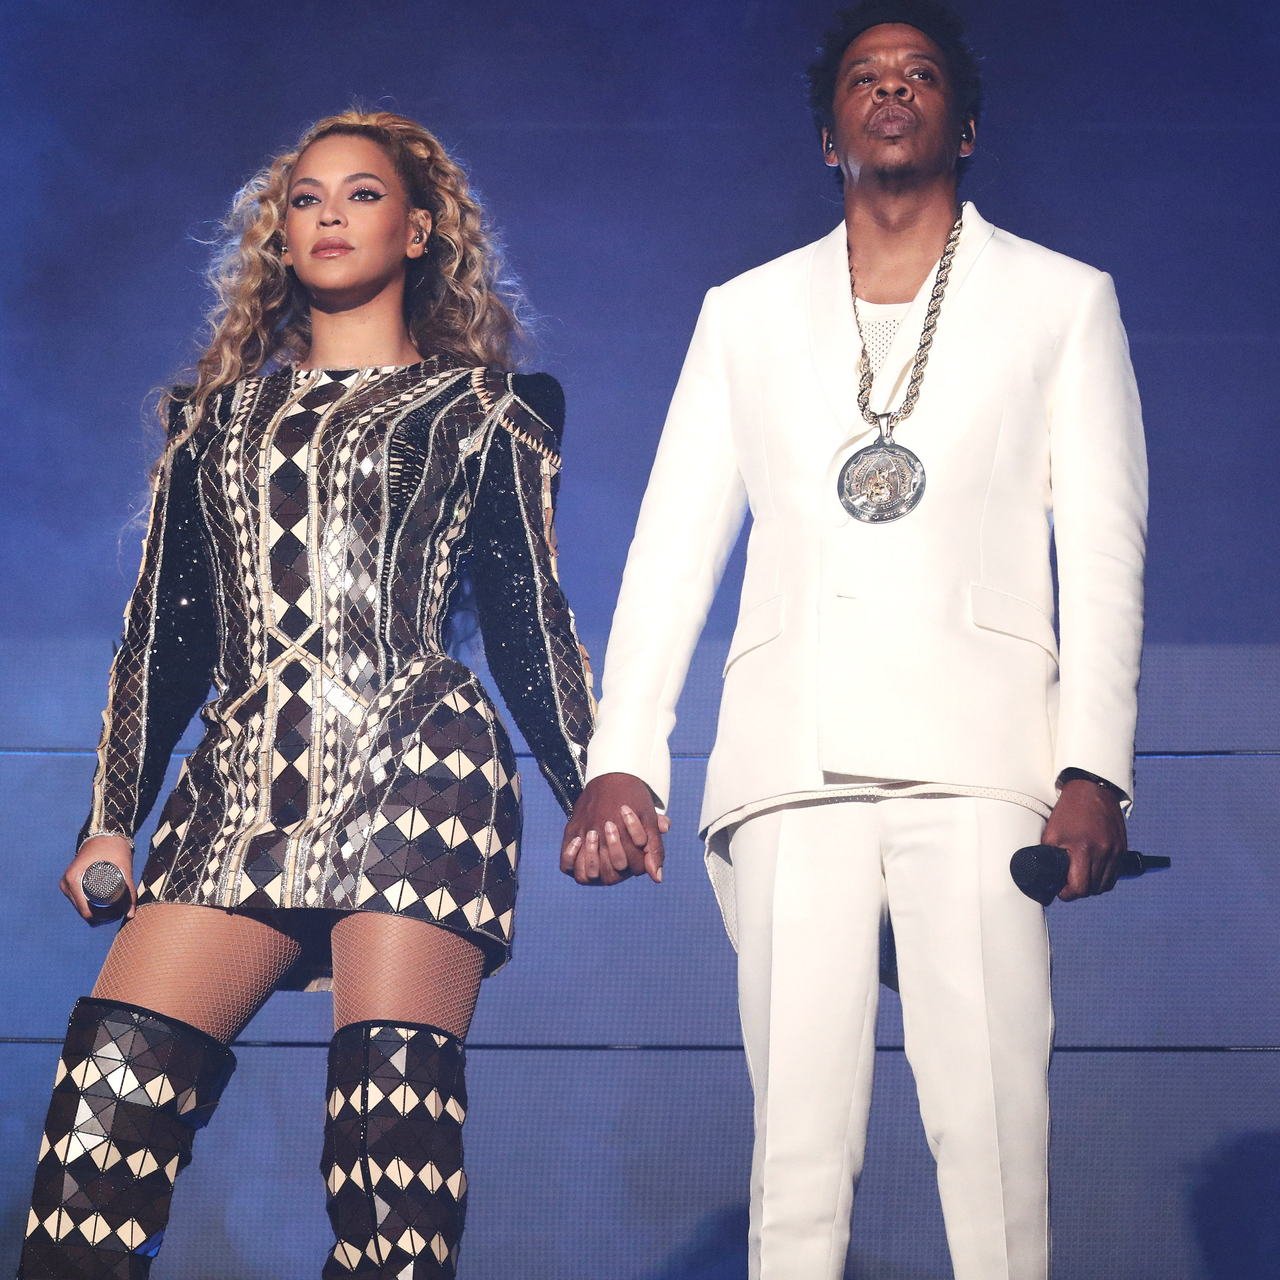 The Quick Read: Beyoncé and JAY-Z Dedicate 'On The Run II' Show ...